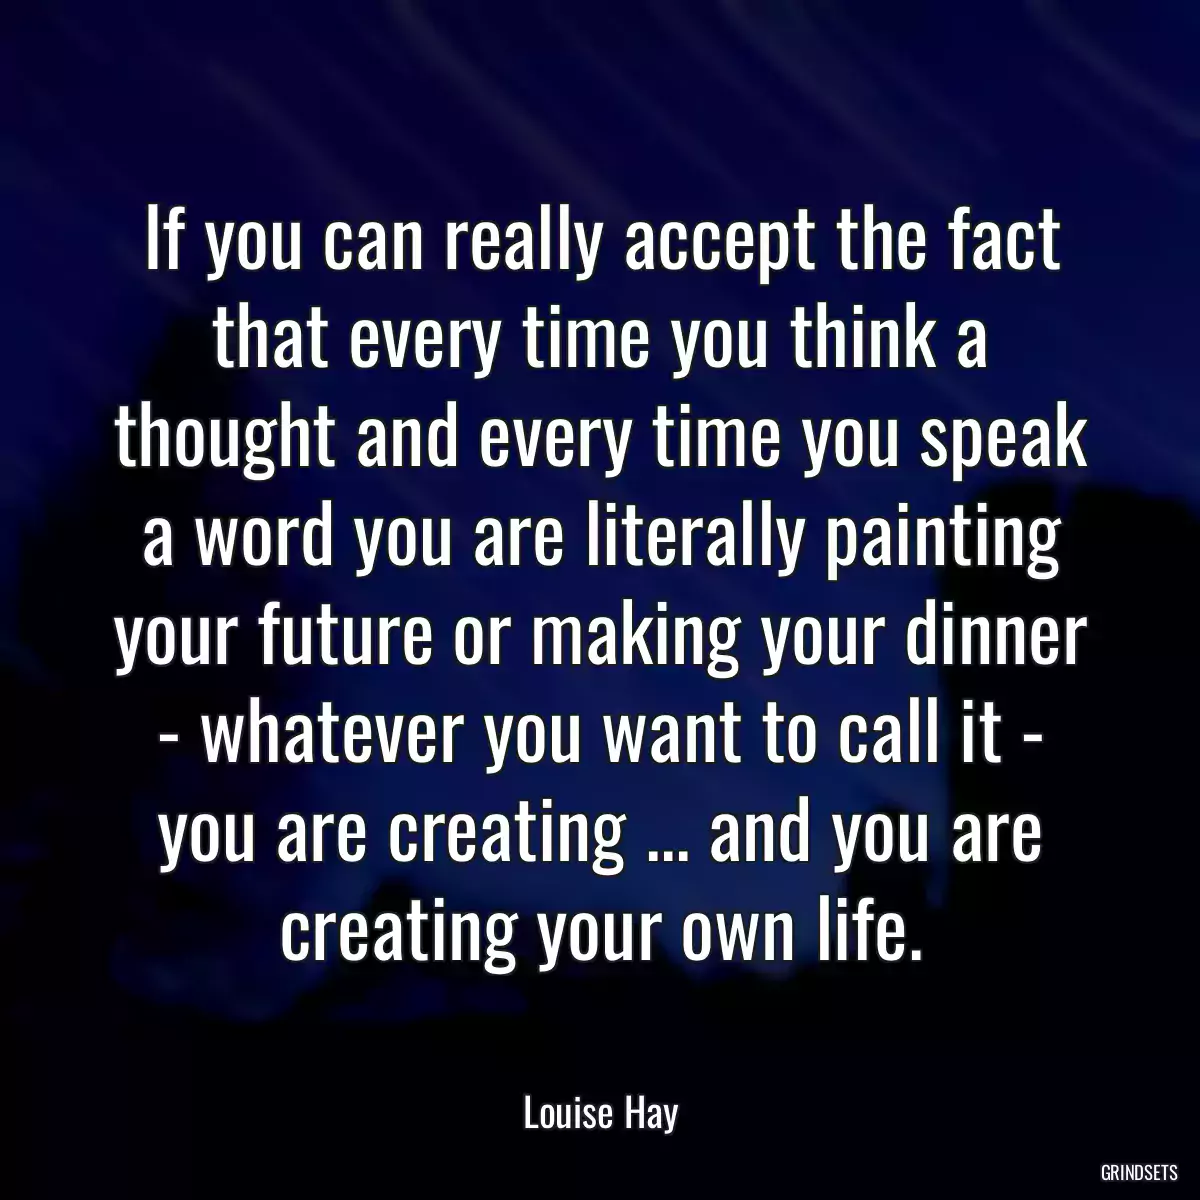 If you can really accept the fact that every time you think a thought and every time you speak a word you are literally painting your future or making your dinner - whatever you want to call it - you are creating ... and you are creating your own life.